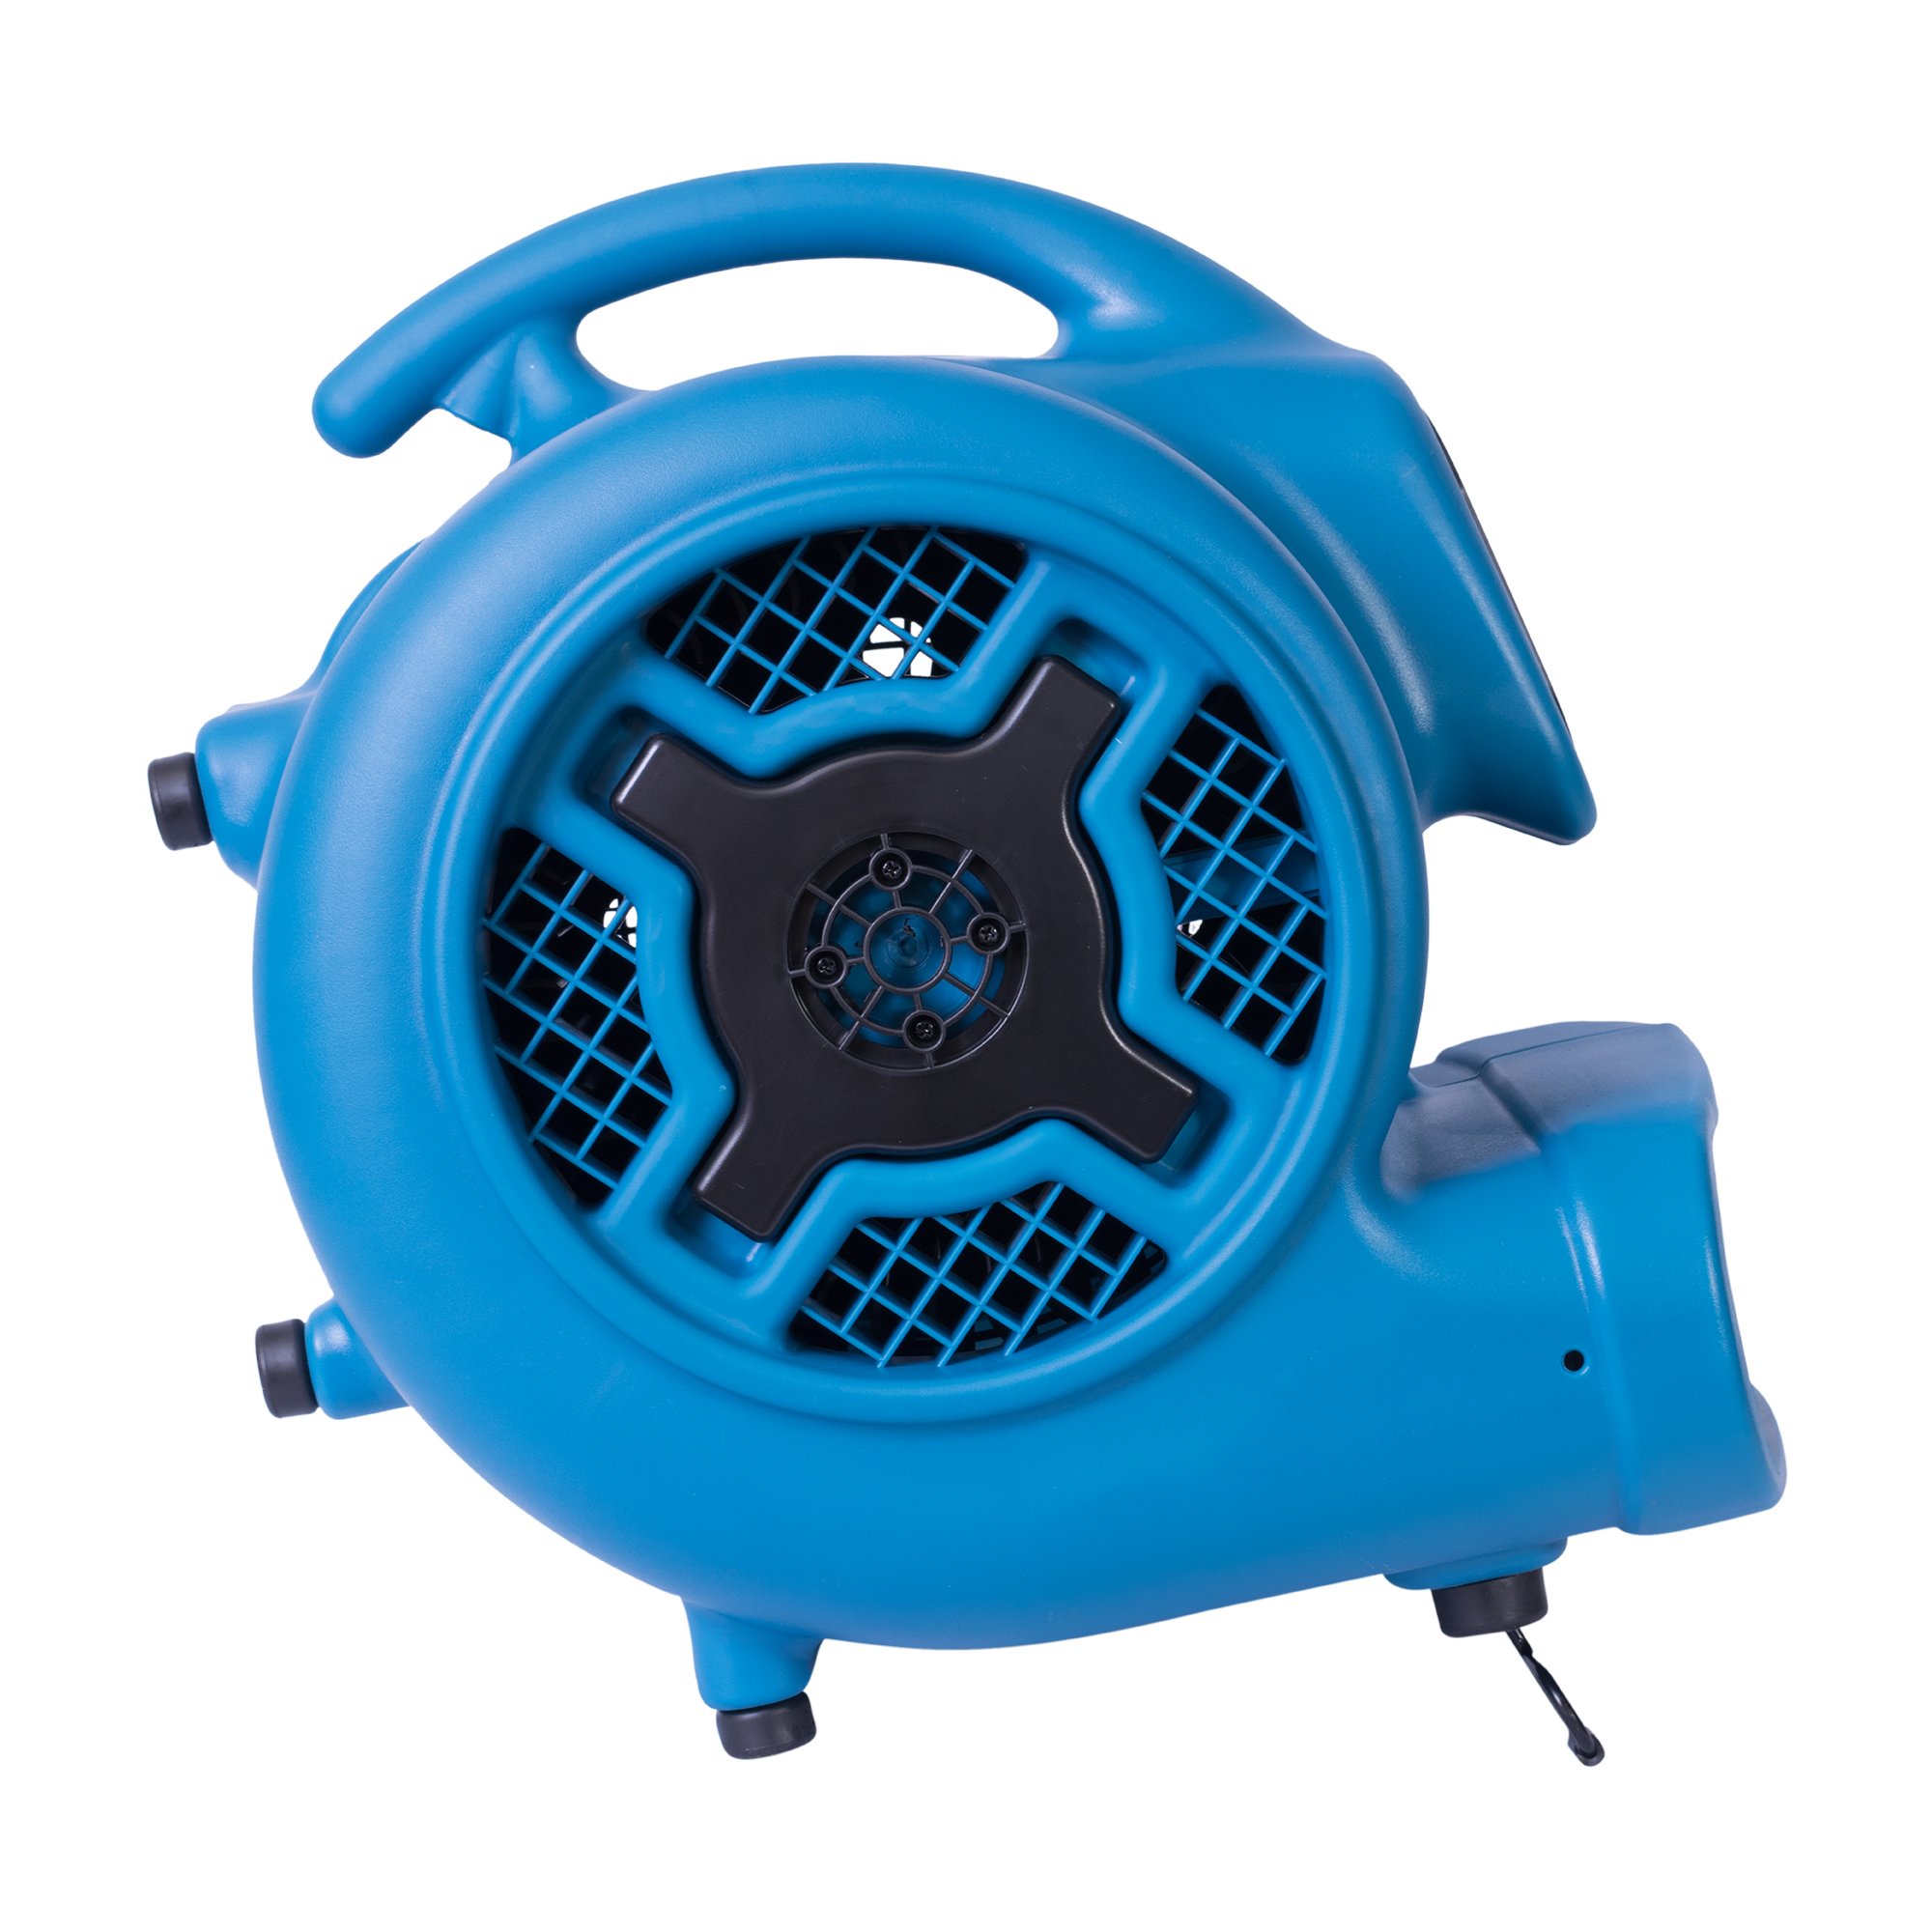 XPOWER P-830 Pro 1 HP 3600 CFM Centrifugal Air Mover, Carpet Dryer, Floor Fan, Blower, for Water Damage Restoration, Janitorial, Plumbing, Home Use…